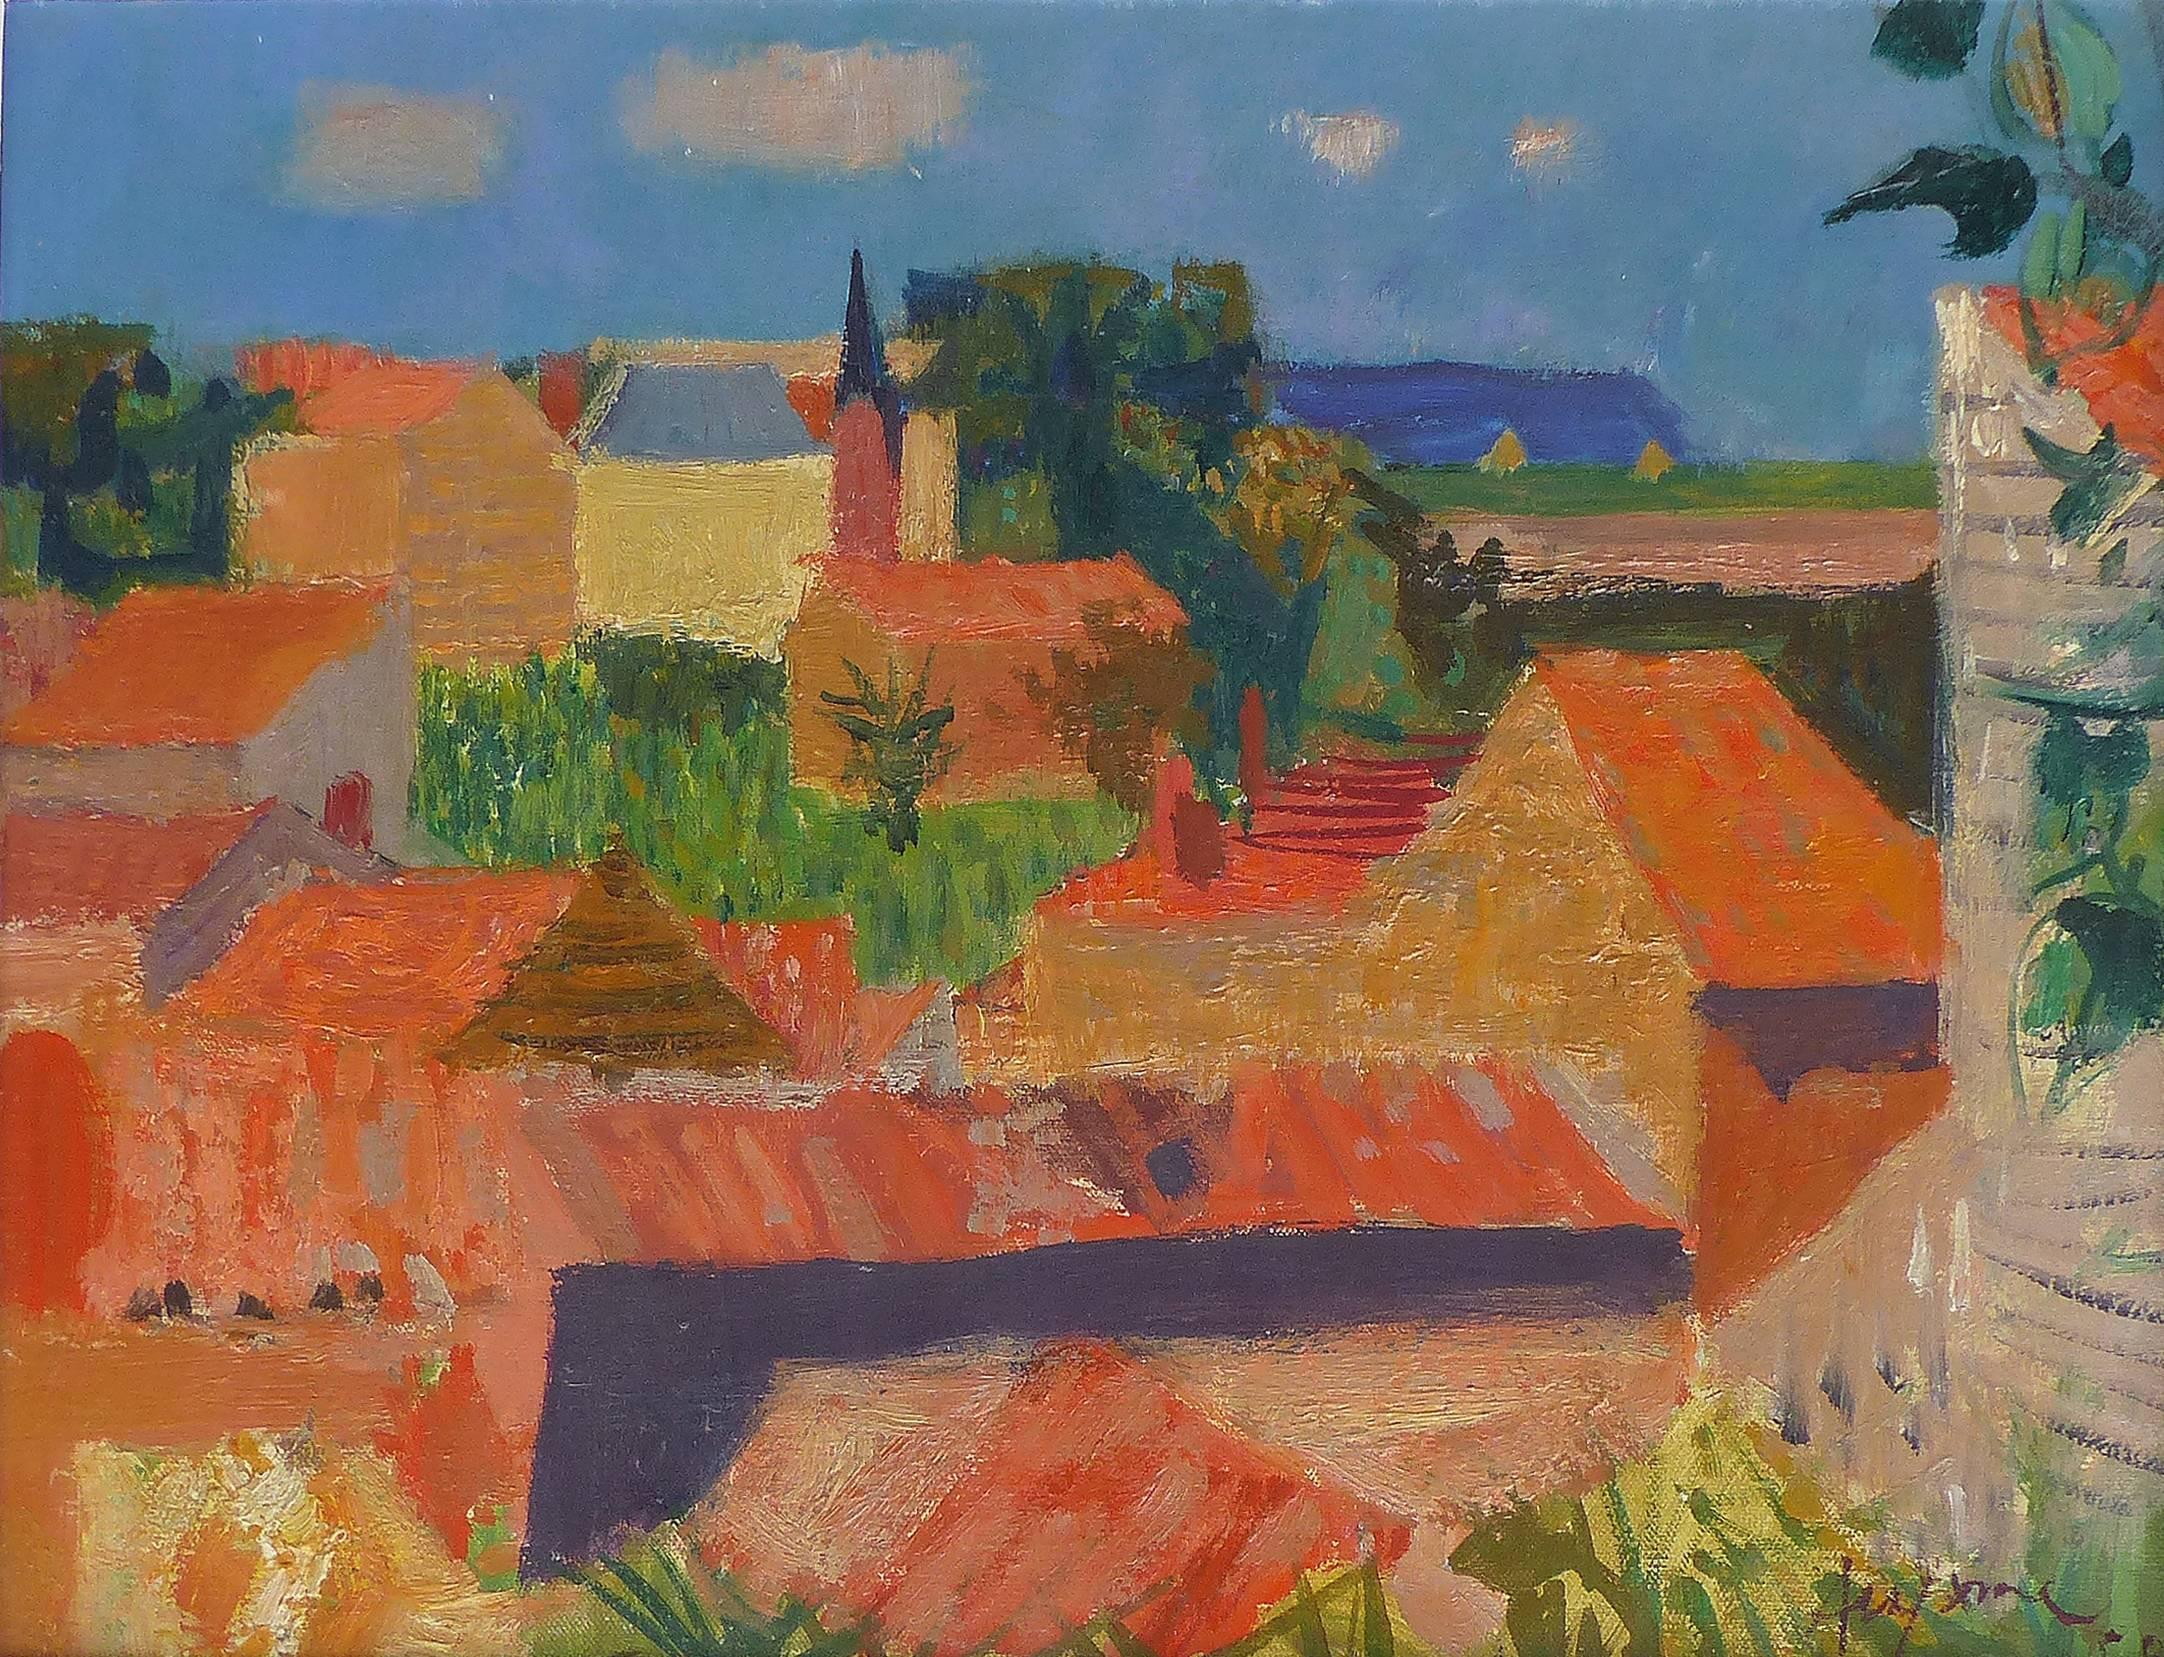 Jean Claude Aujume 1959 Midcentury Oil Painting of a French Landscape 

Offered for sale is an oil on linen canvas landscape painting by the French artist Jean Claude Aujame created in 1959. The artist used a palette of clean and bright color with